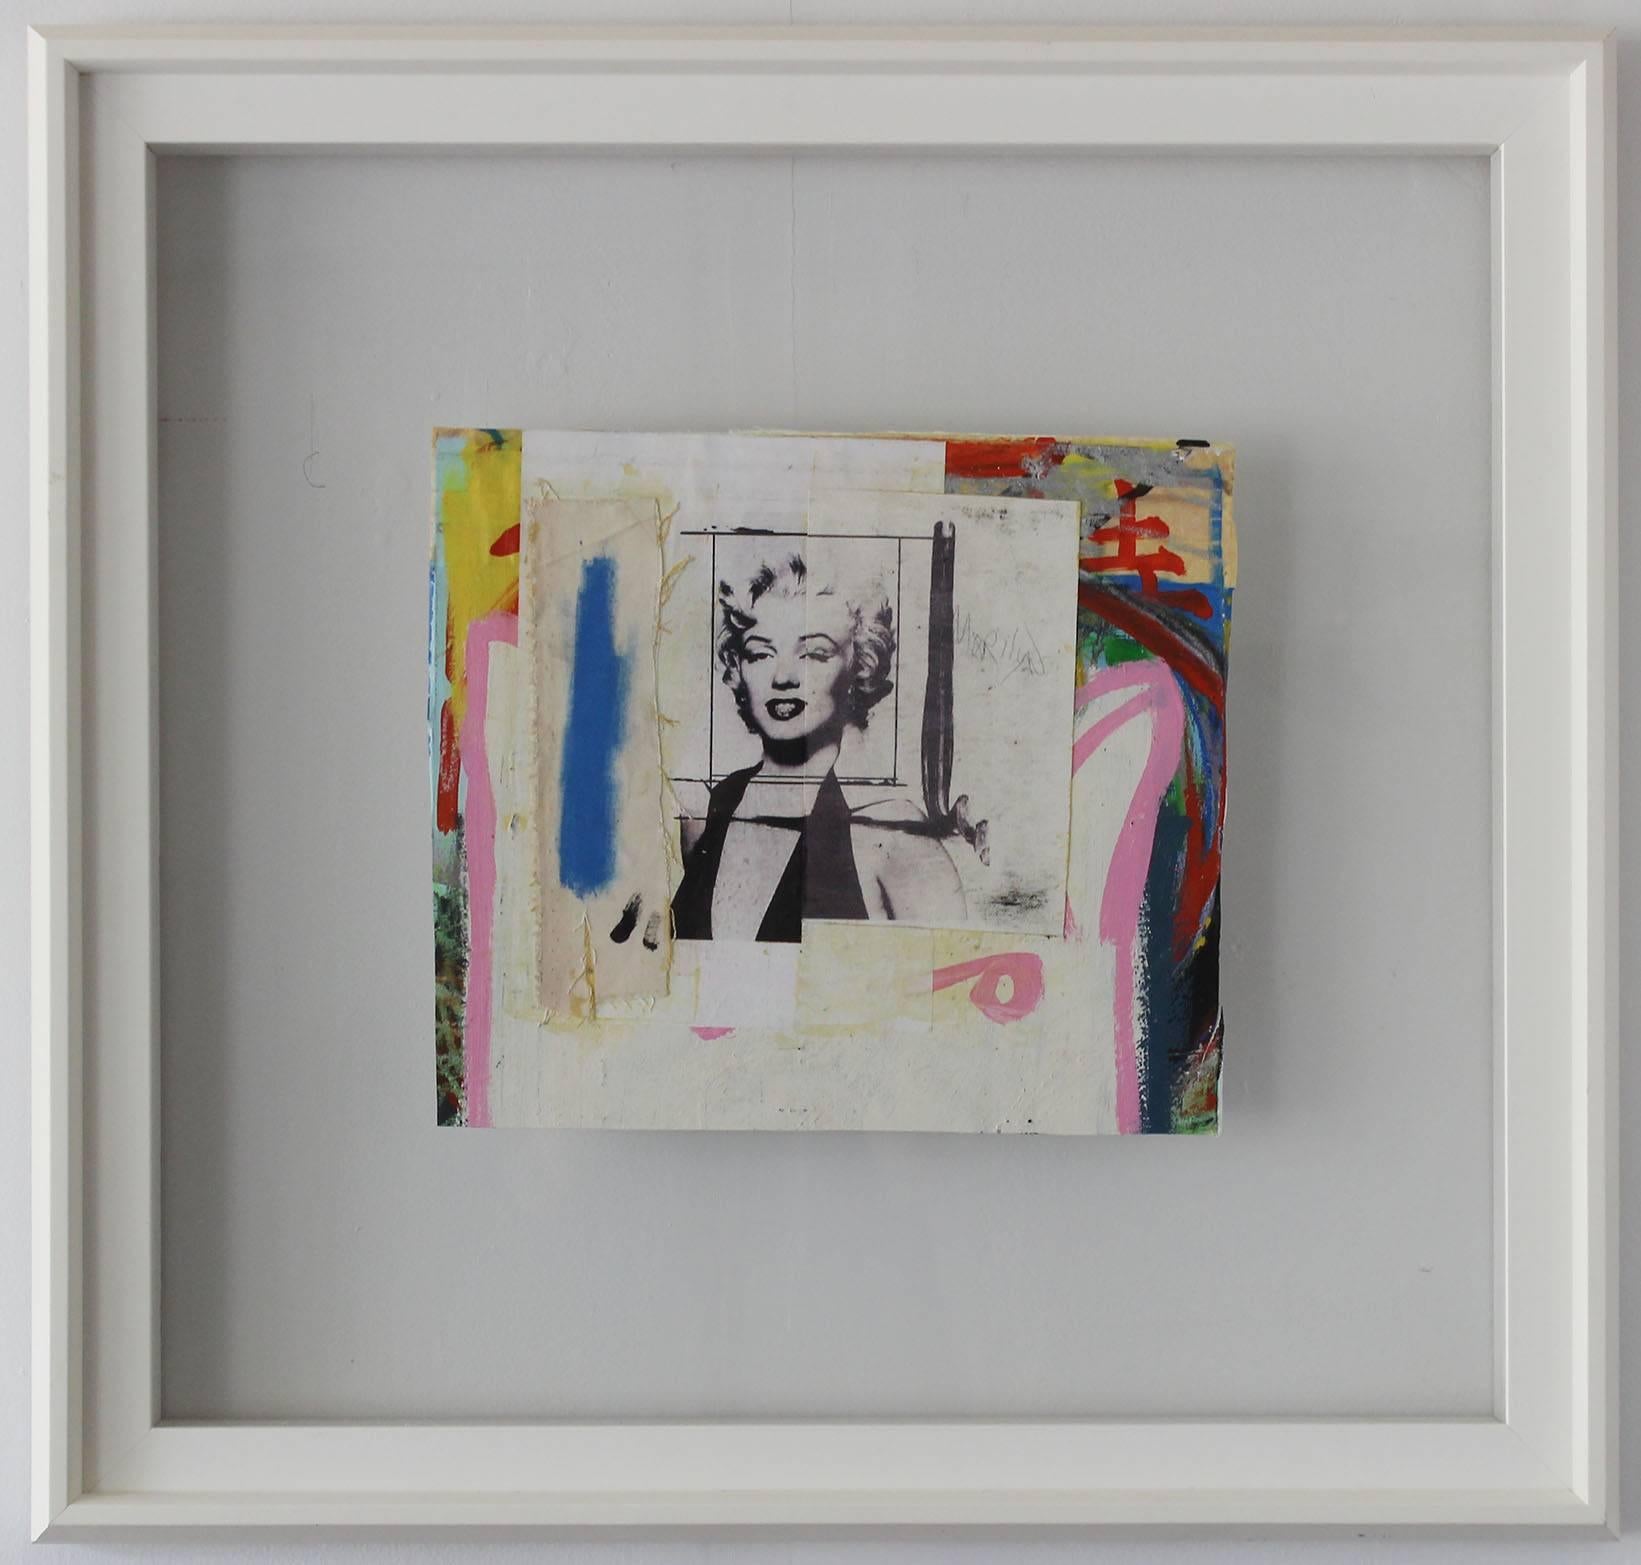 A framed, mixed-media work on paper, floated between glass by French artist Fabrice Dupre.